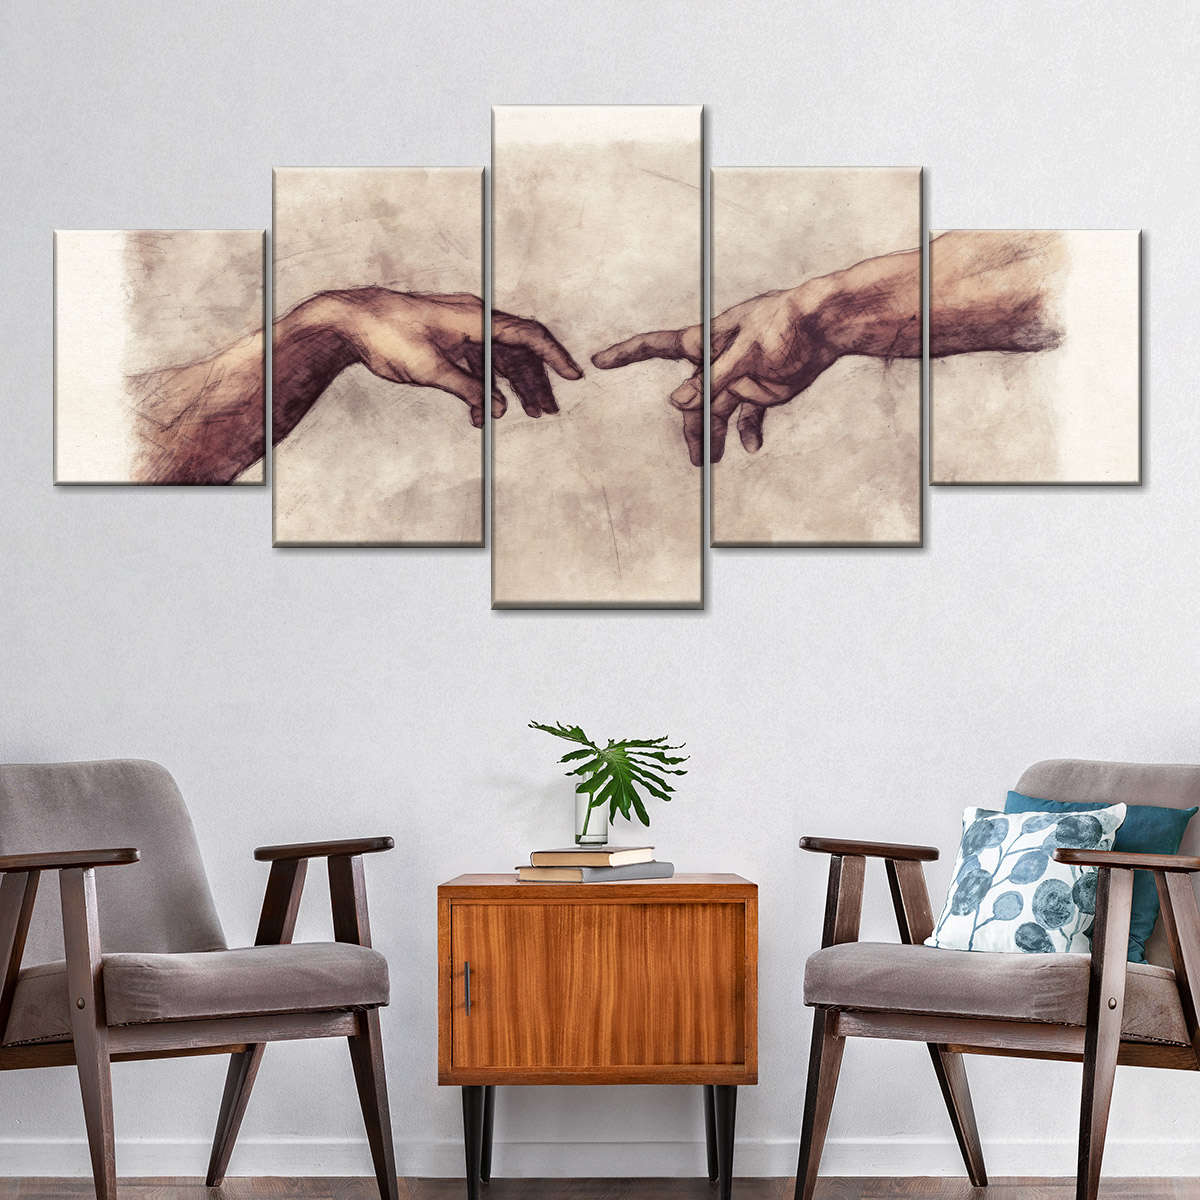 Angels Touching Fingers Wall Art: Canvas Prints, Art Prints & Framed Canvas